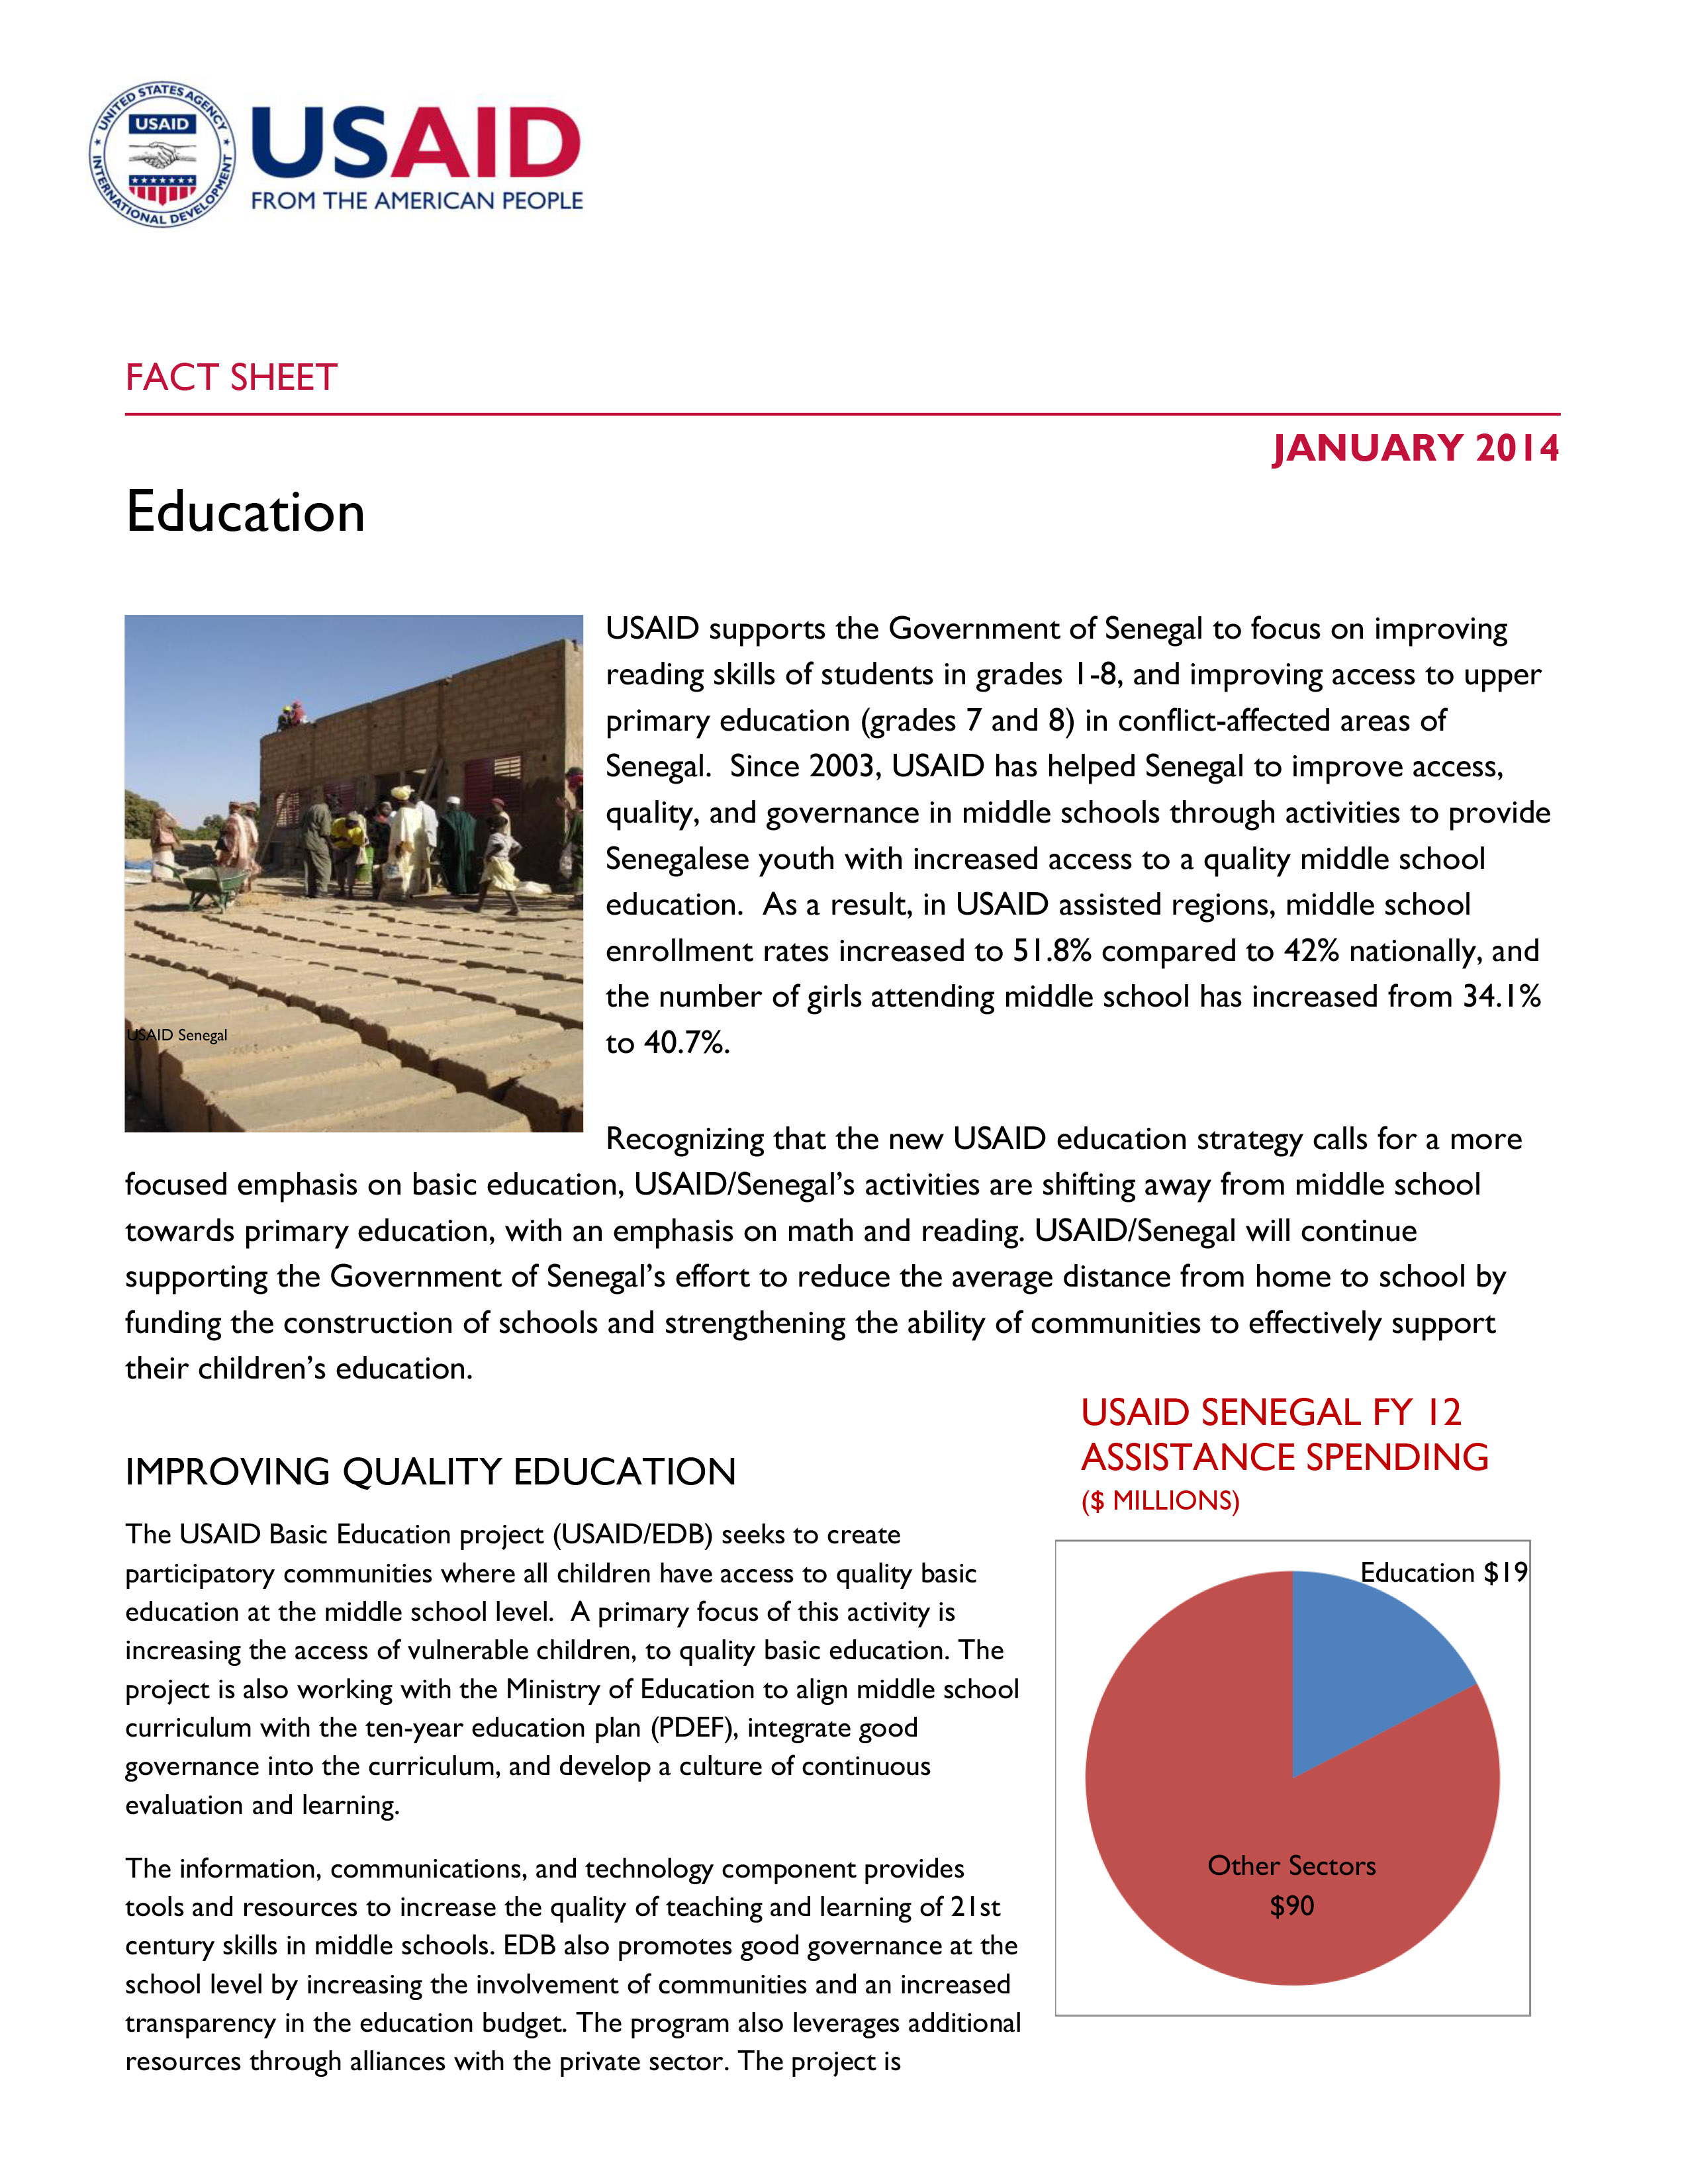 A print-ready, downloadable version of USAID Senegal's Education Fact Sheet